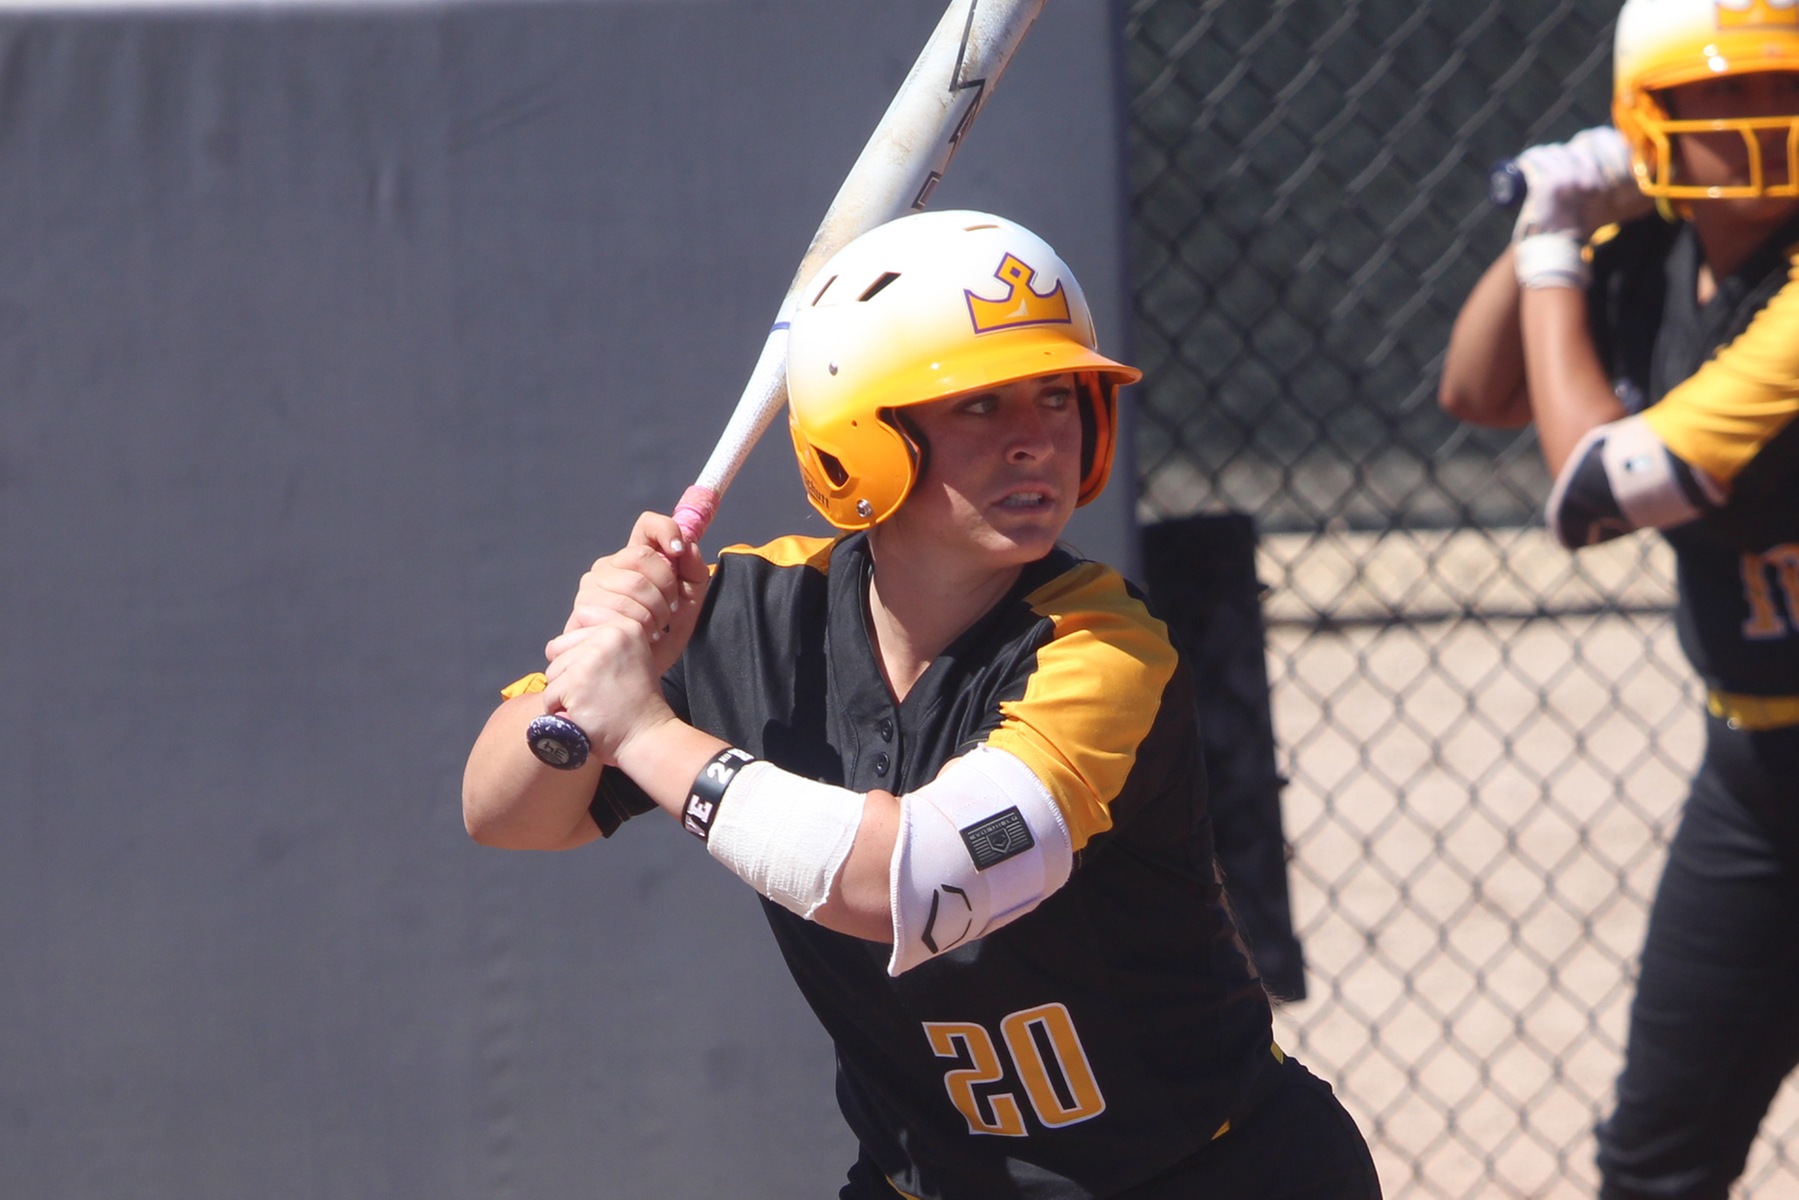 Kendall Marinesi hit her eighth home run of the year as CLU took on No. 10 CMS.